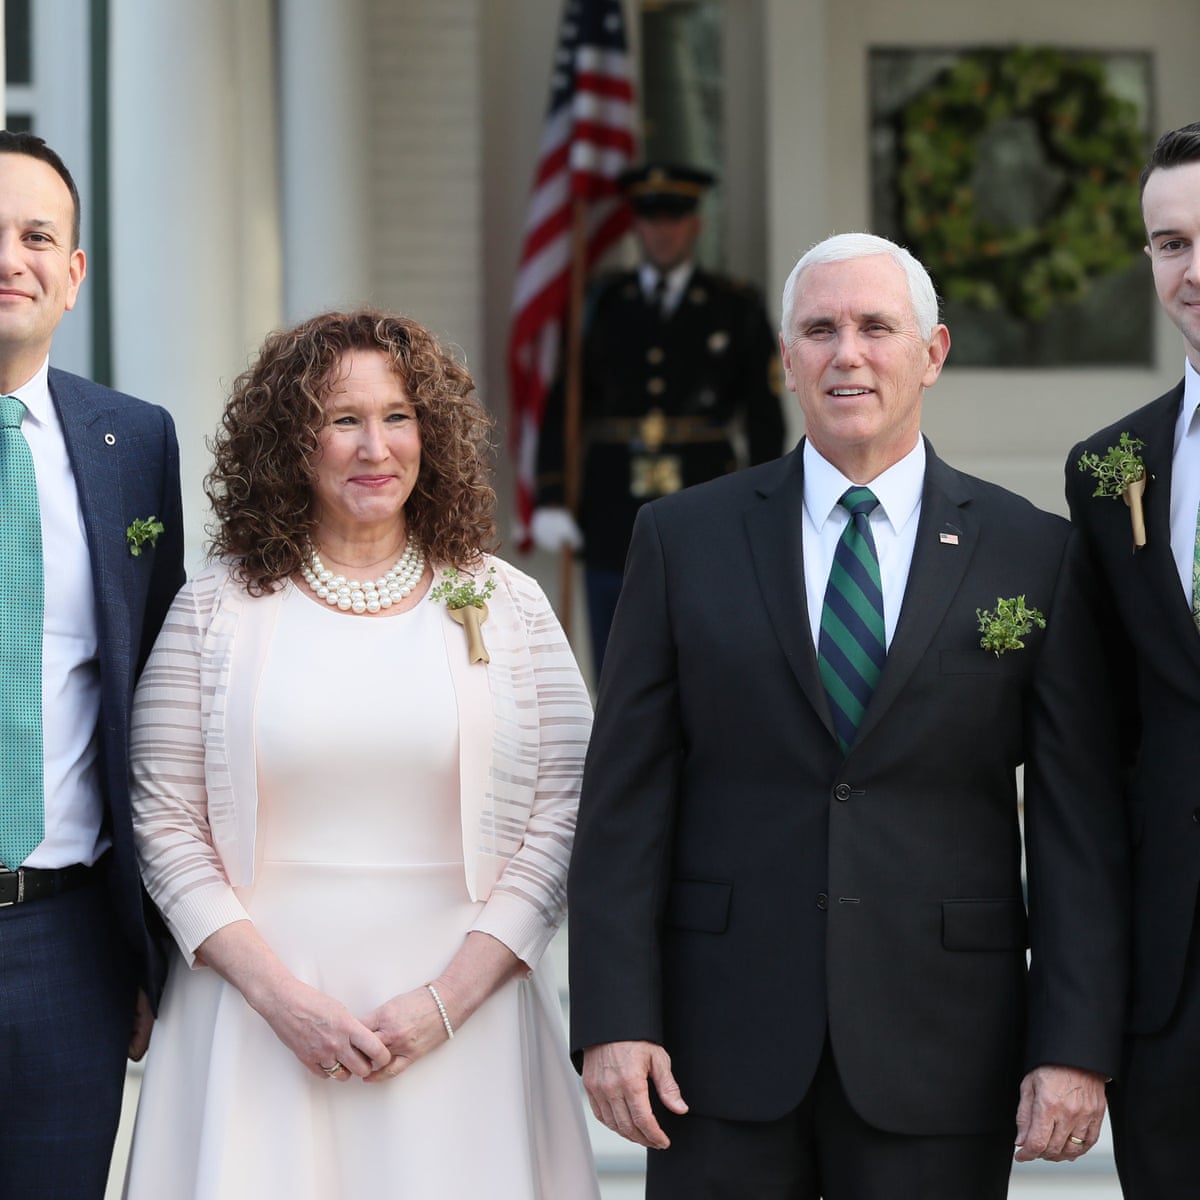 Irish Pm Brings Partner To Meet Mike Pence And Delivers Pointed